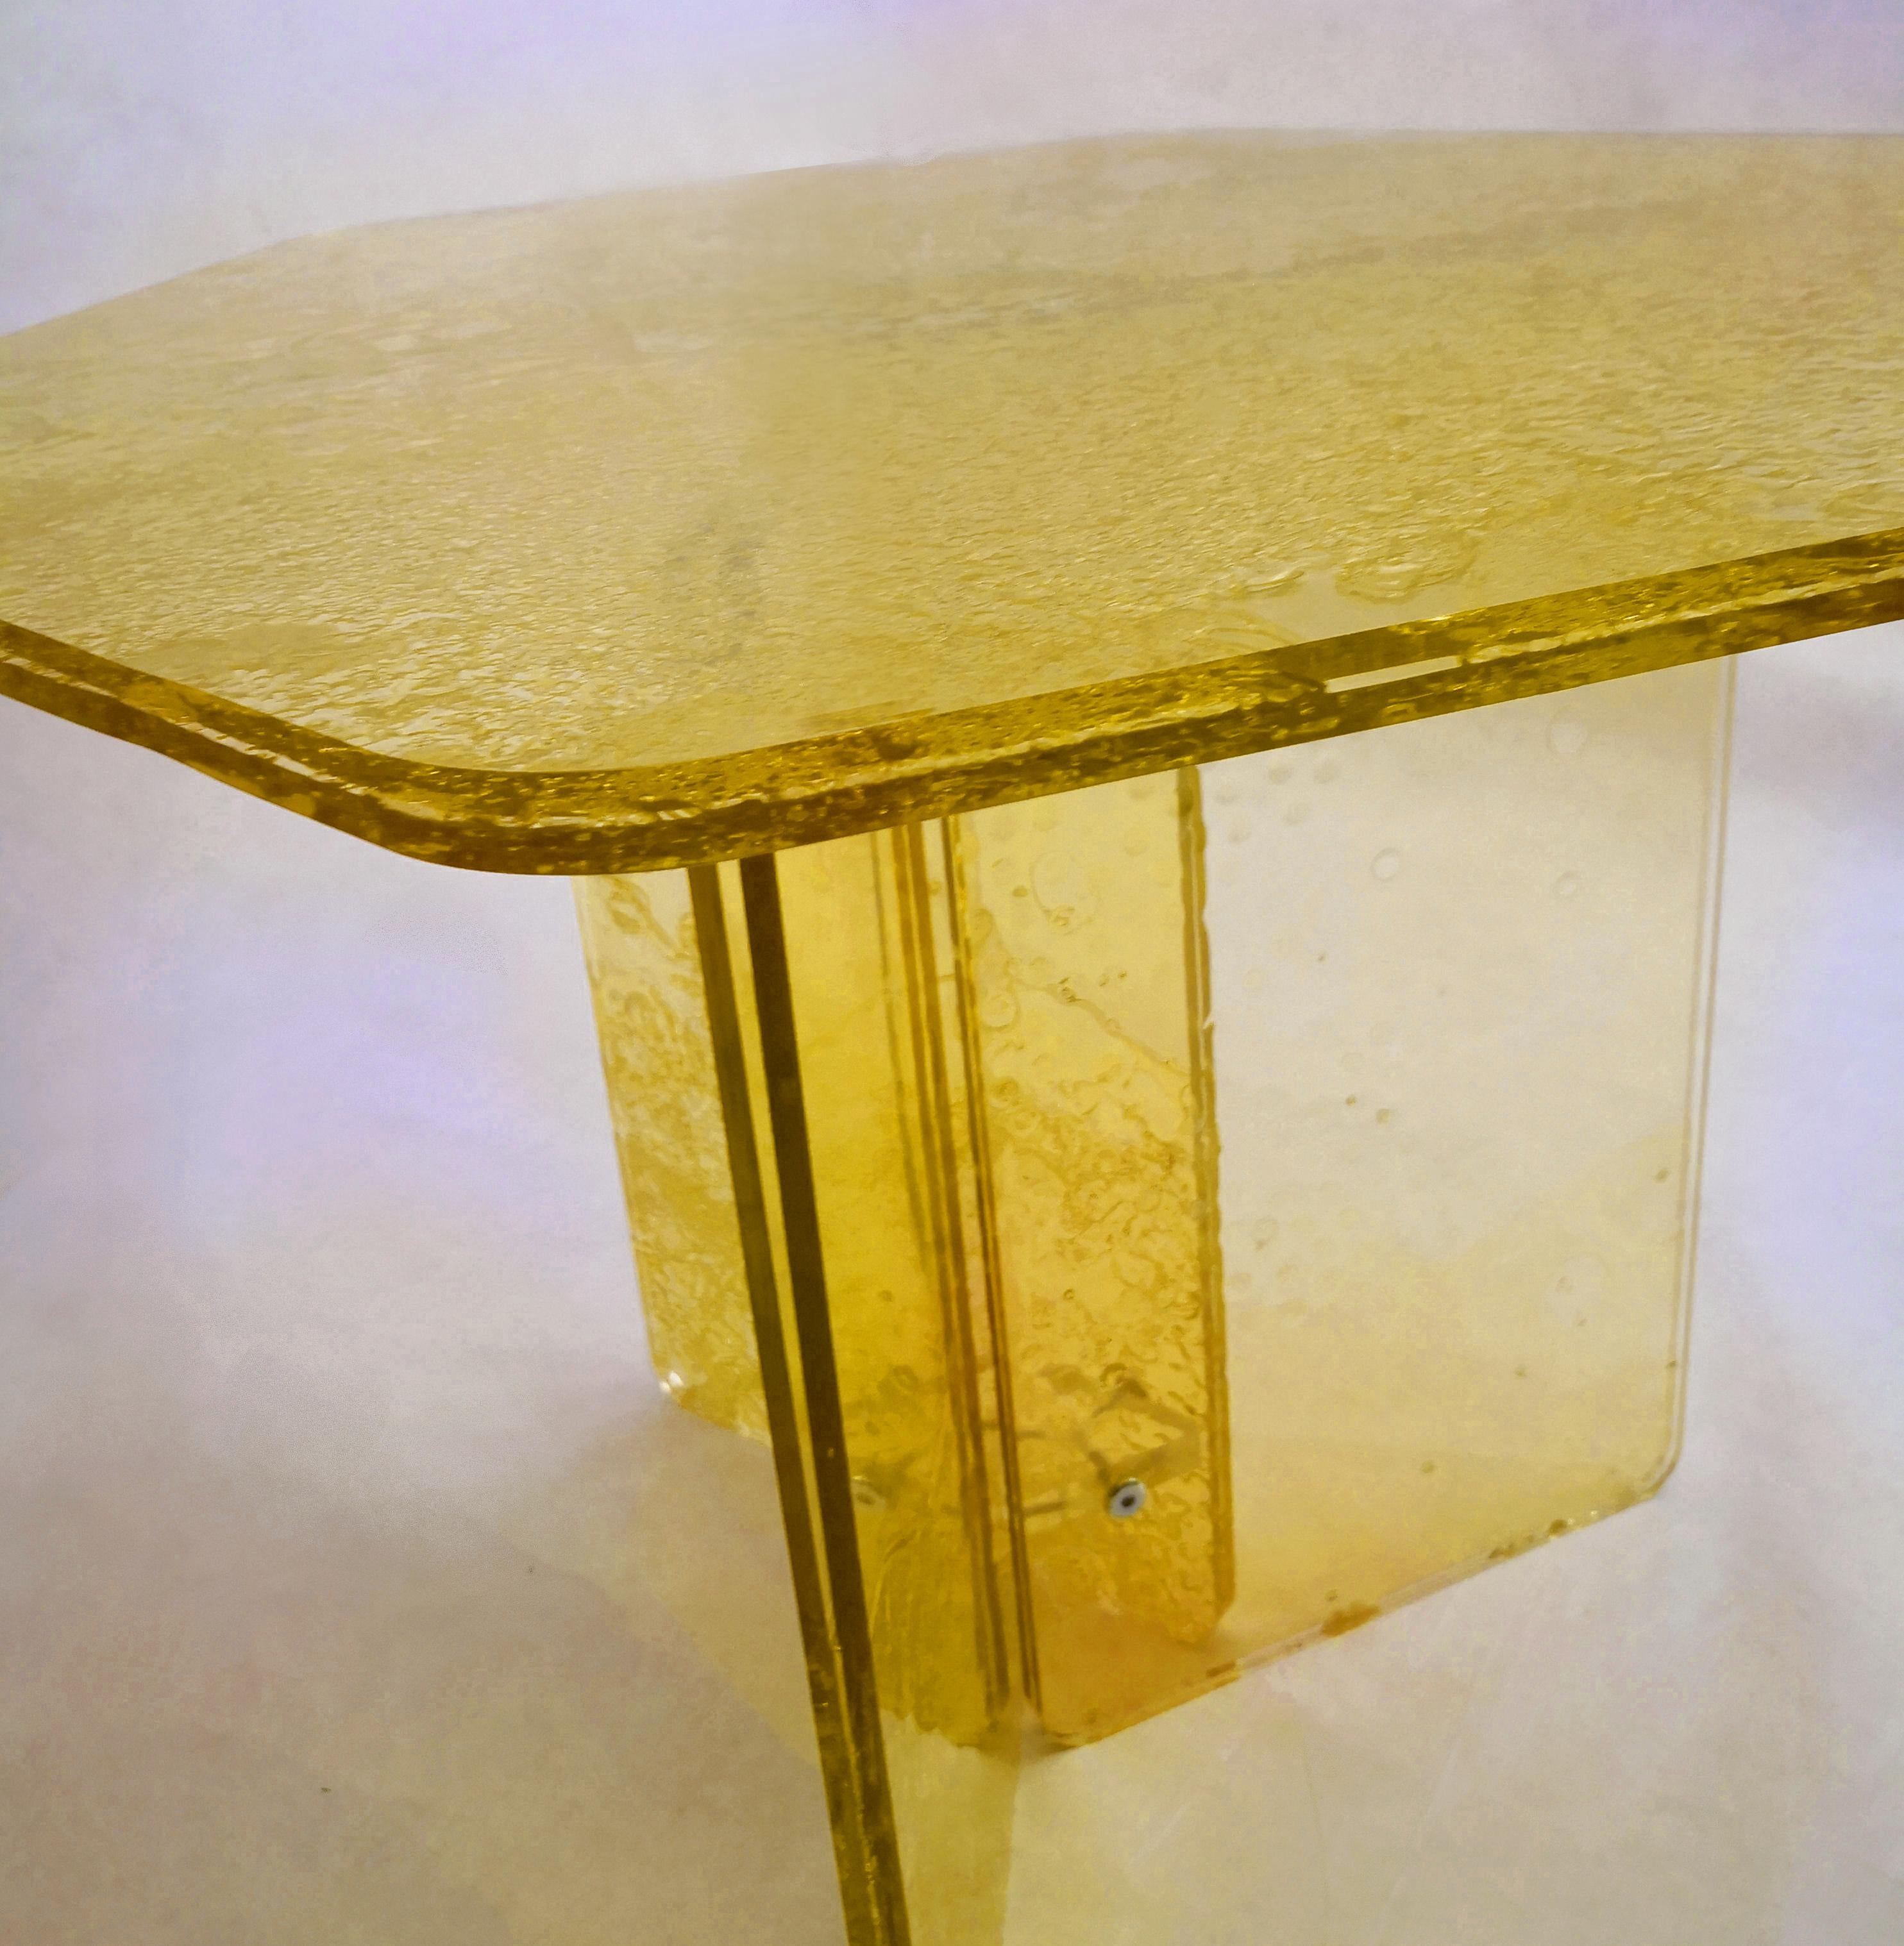 Contemporary Sketch Hexagon Sidetable Made of Yellow Acrylic Des, Roberto Giacomucci in 2020 For Sale